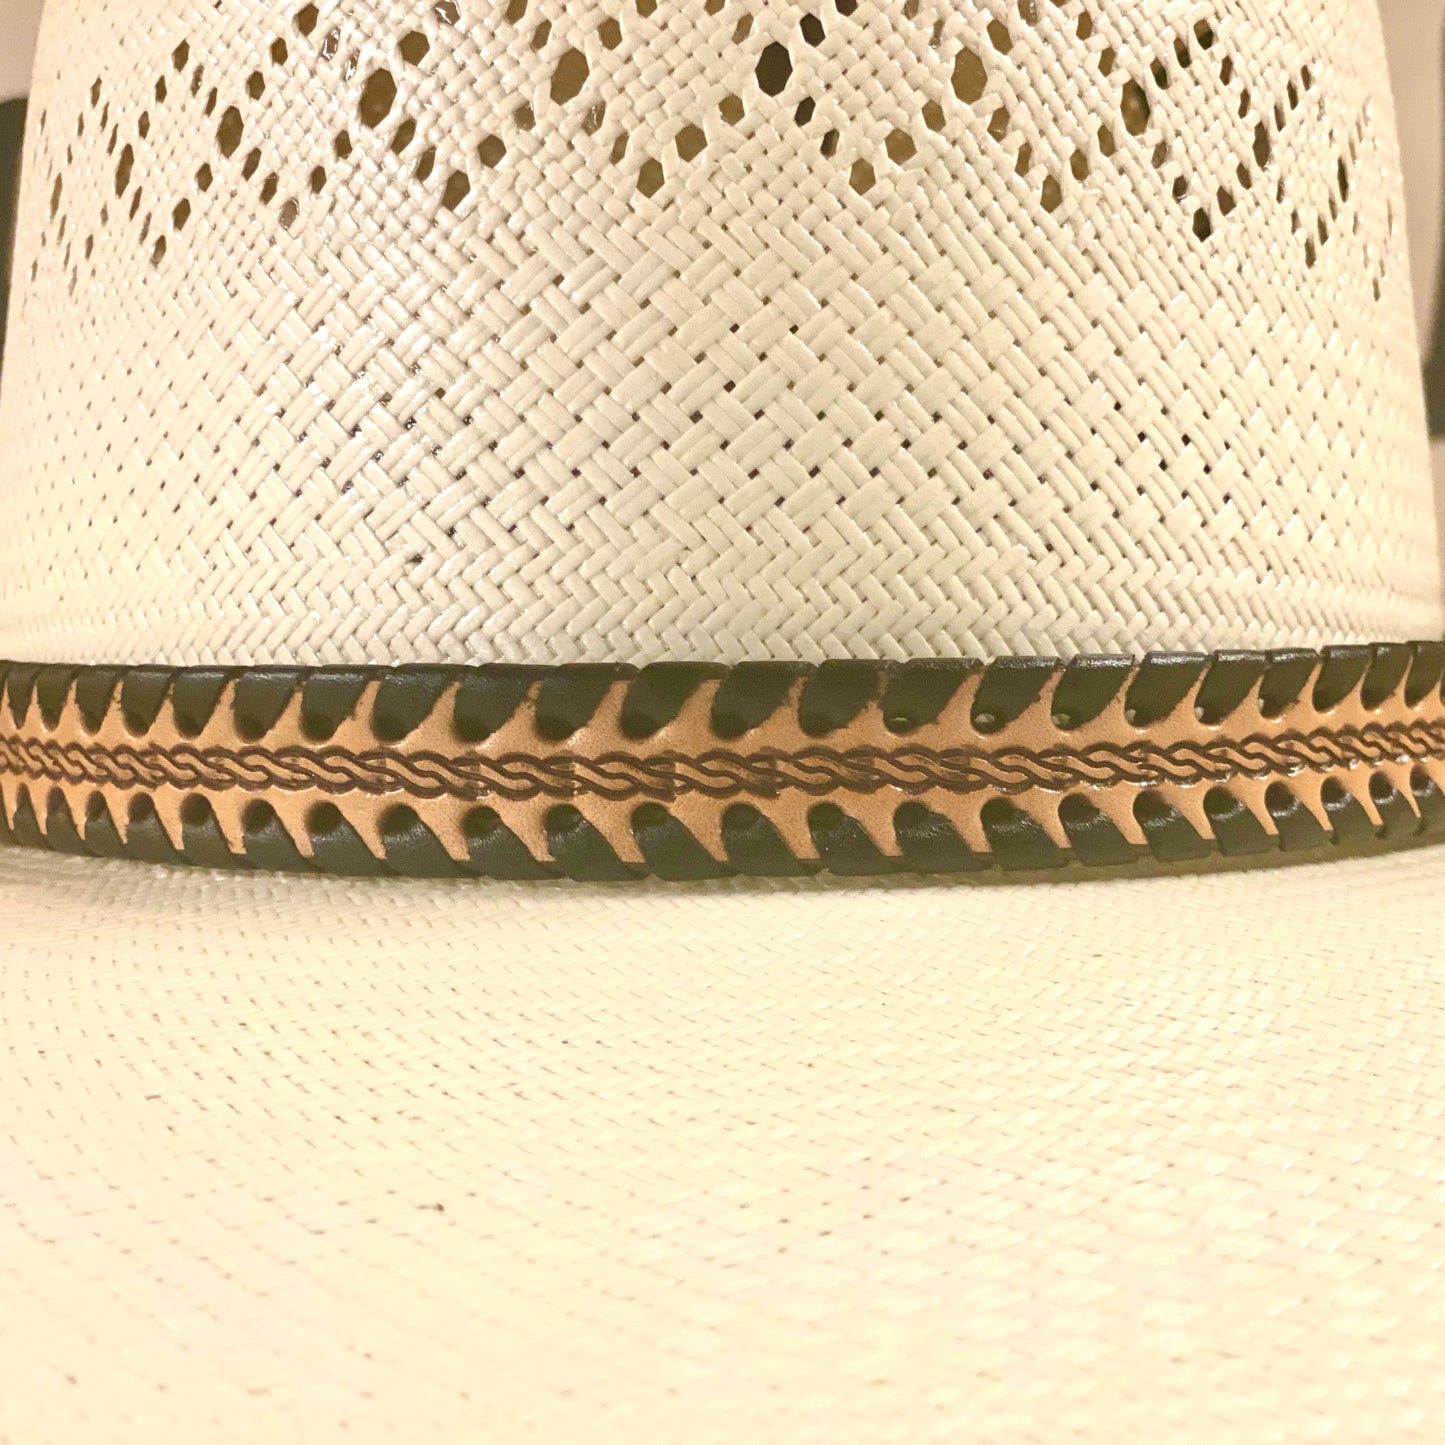 Hatband HB76-4 | 3/4" Tan Leather w/ Brown Whipstitch